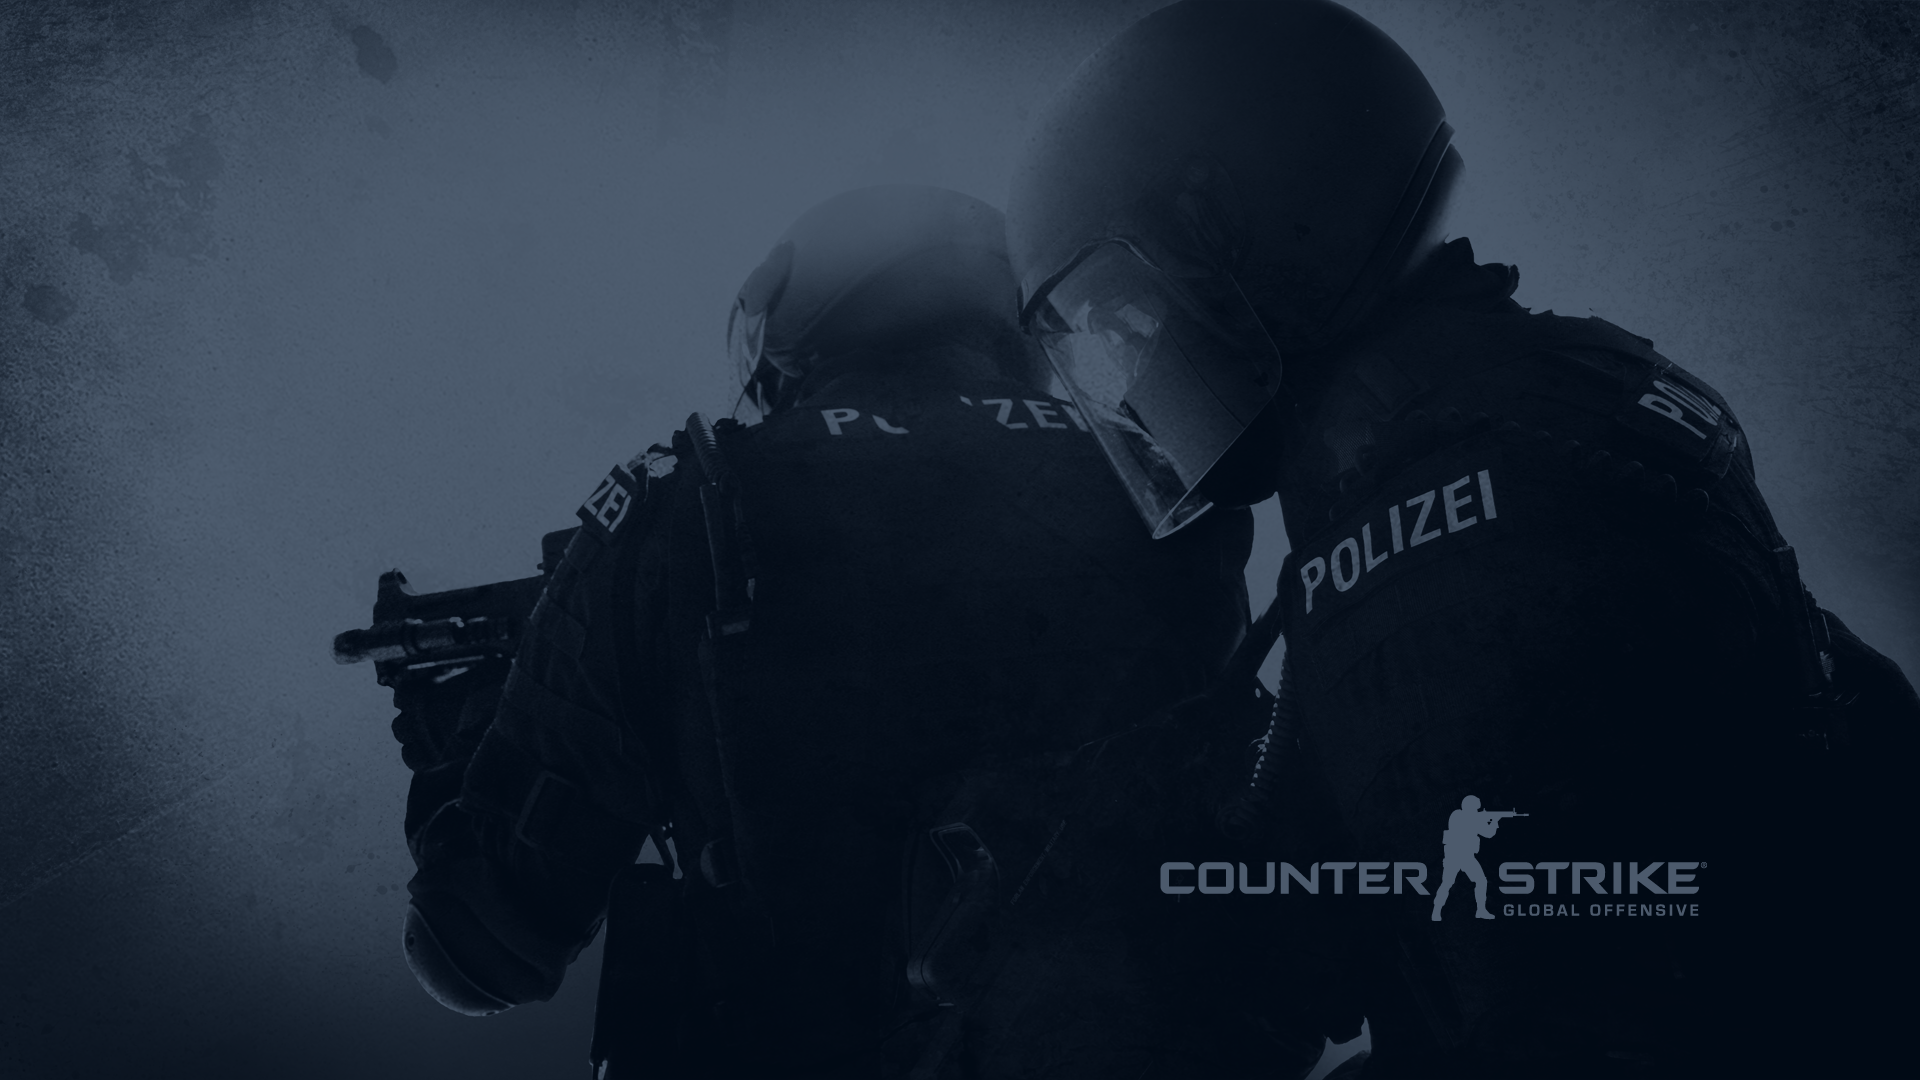 Wallpapers Counter Strike Game bwallescom Gallery